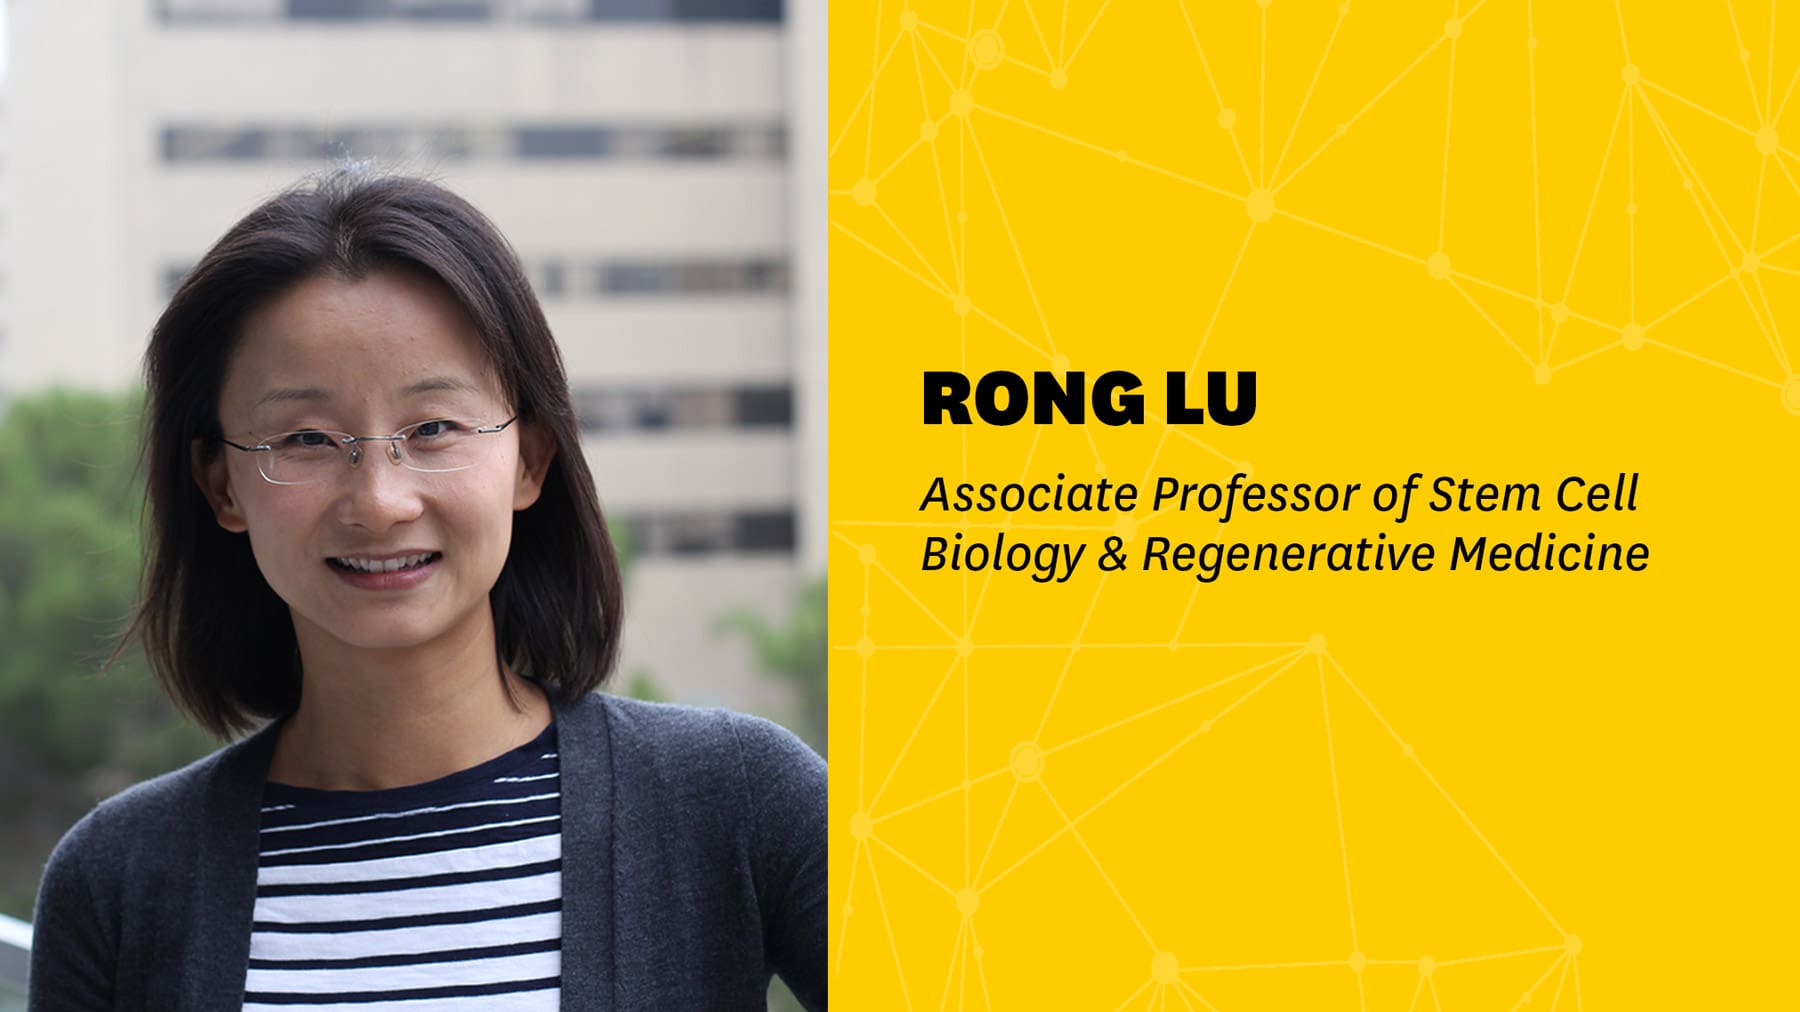 Portrait of Rong Lu with name and faculty title